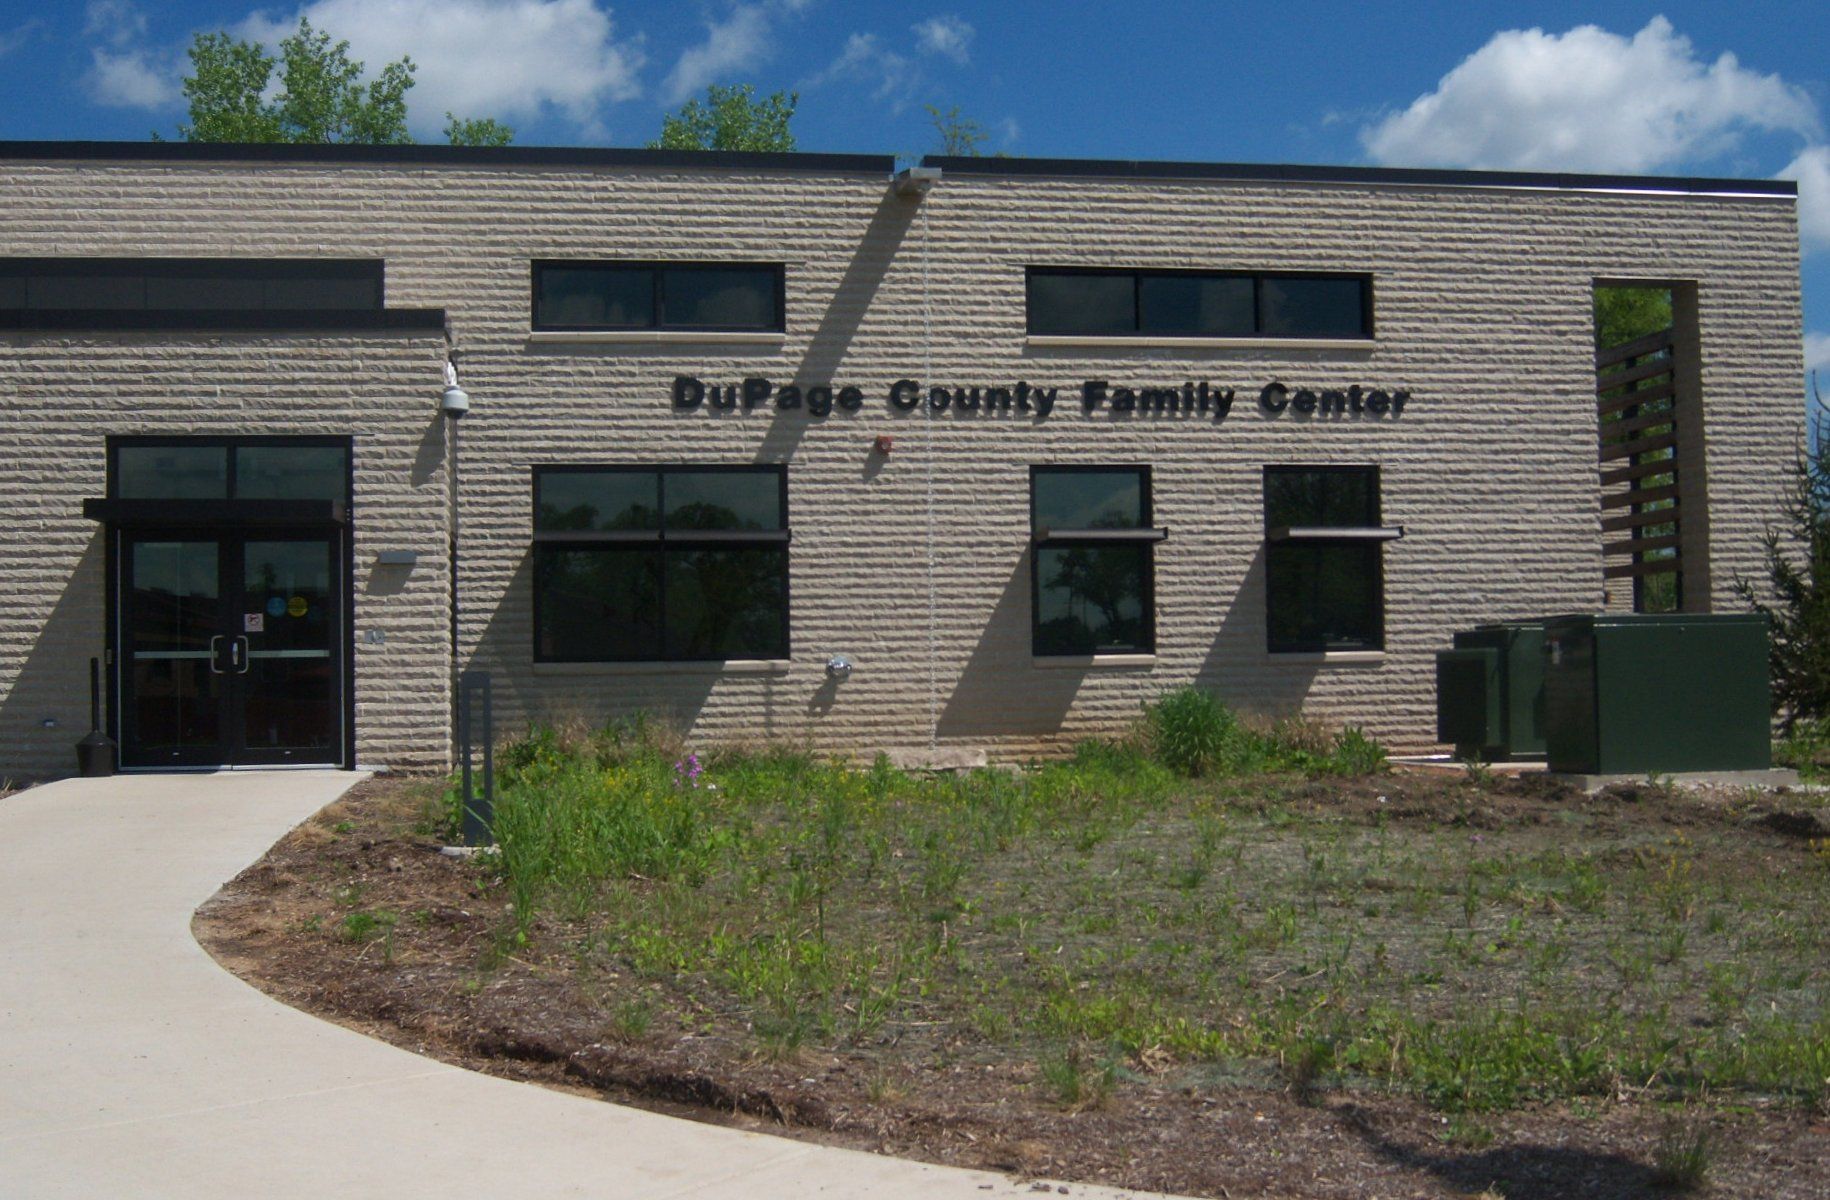 Dupage County Family Service